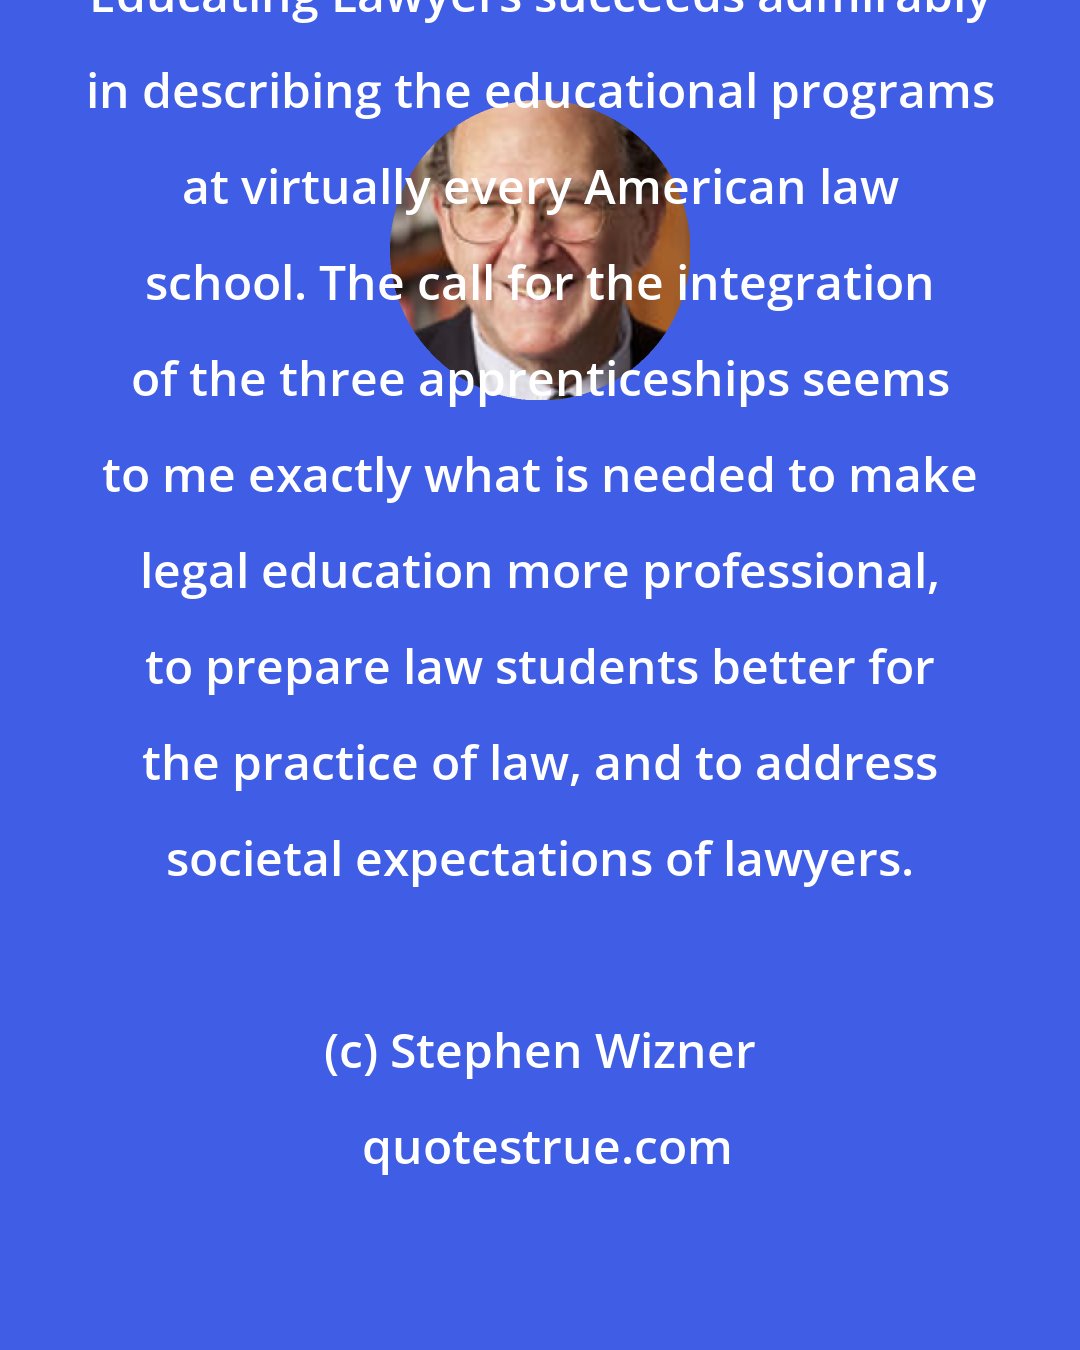 Stephen Wizner: Educating Lawyers succeeds admirably in describing the educational programs at virtually every American law school. The call for the integration of the three apprenticeships seems to me exactly what is needed to make legal education more professional, to prepare law students better for the practice of law, and to address societal expectations of lawyers.